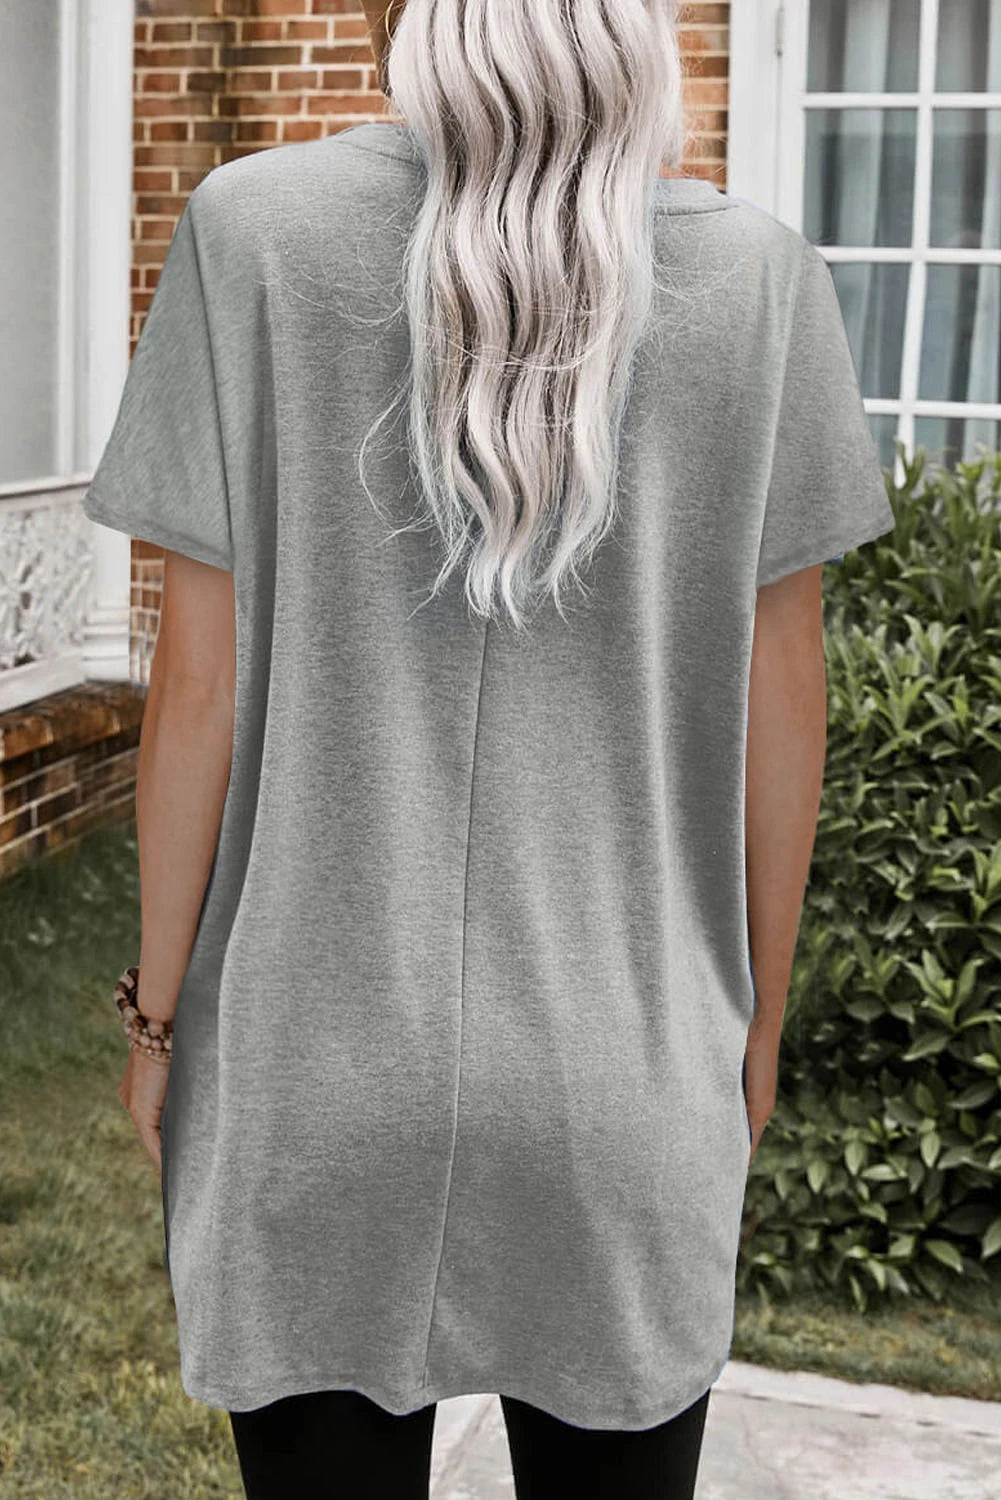 WOMAN WEARING A GRAY T-SHIRT DRESS WITH POCKETS